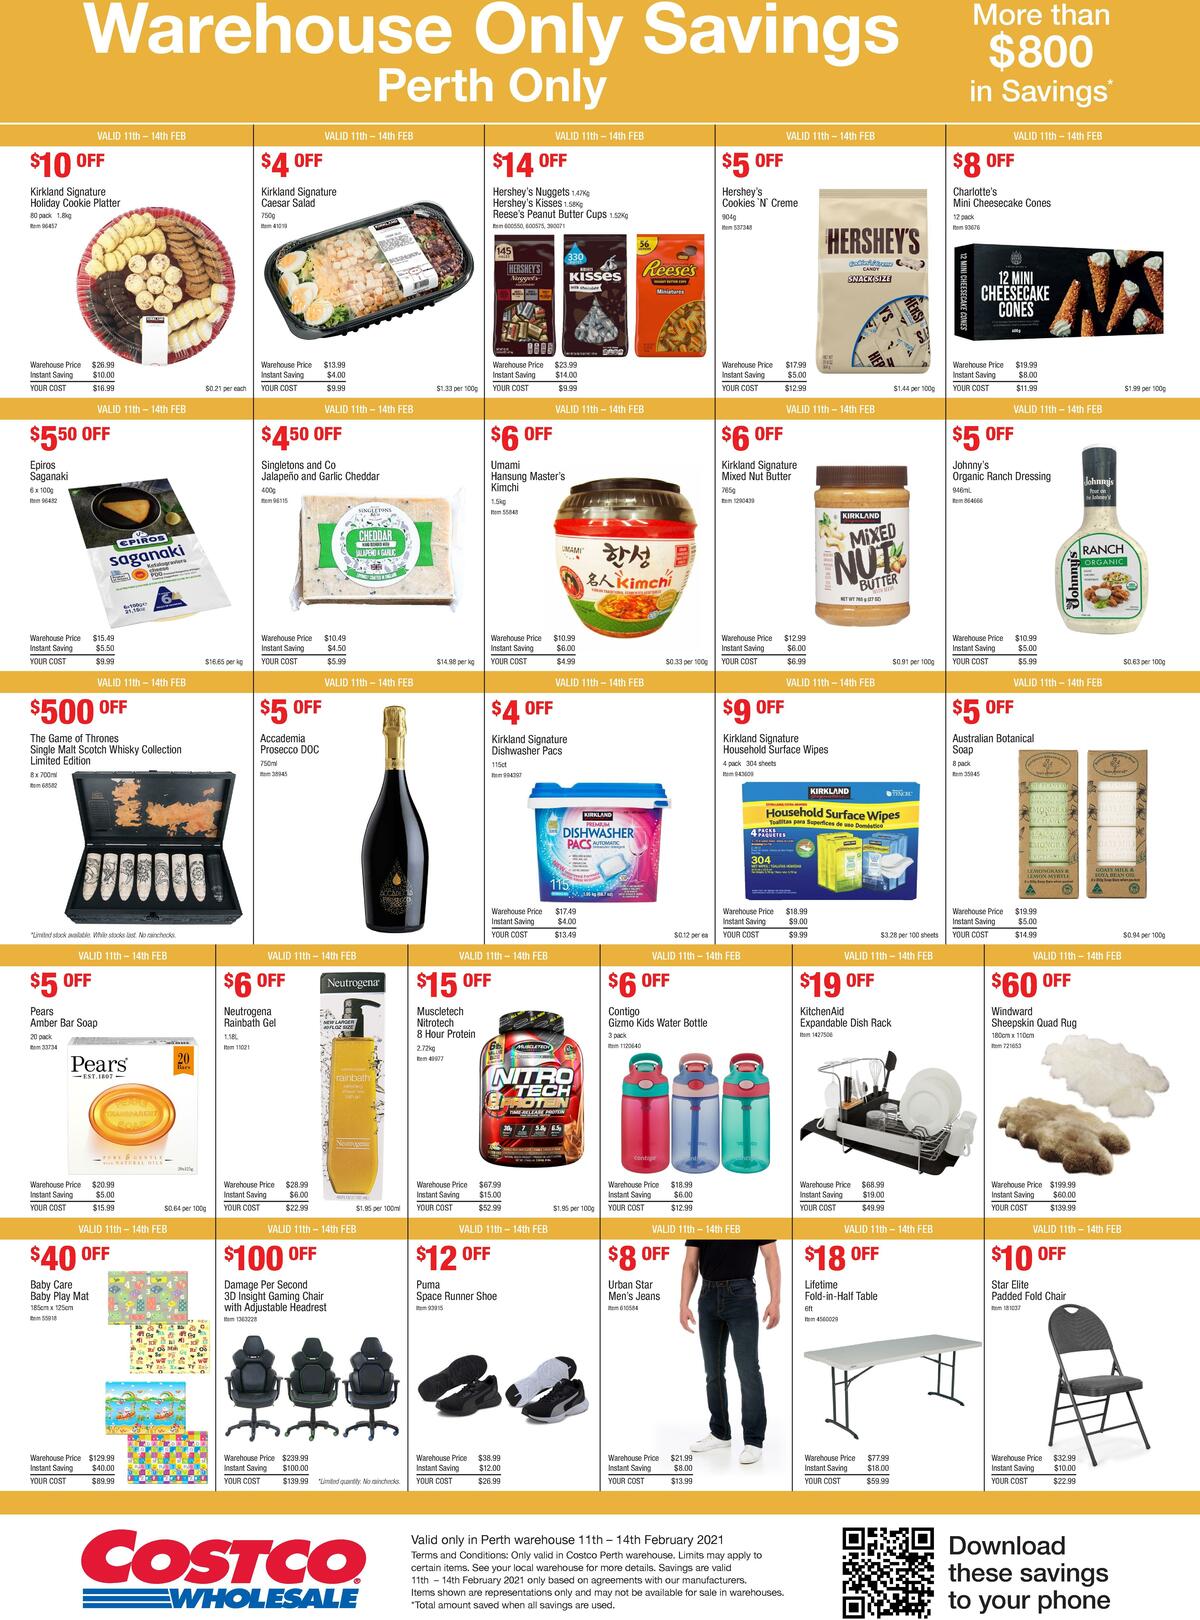 Costco Warehouse Savings: Perth Only Catalogues from 11 February